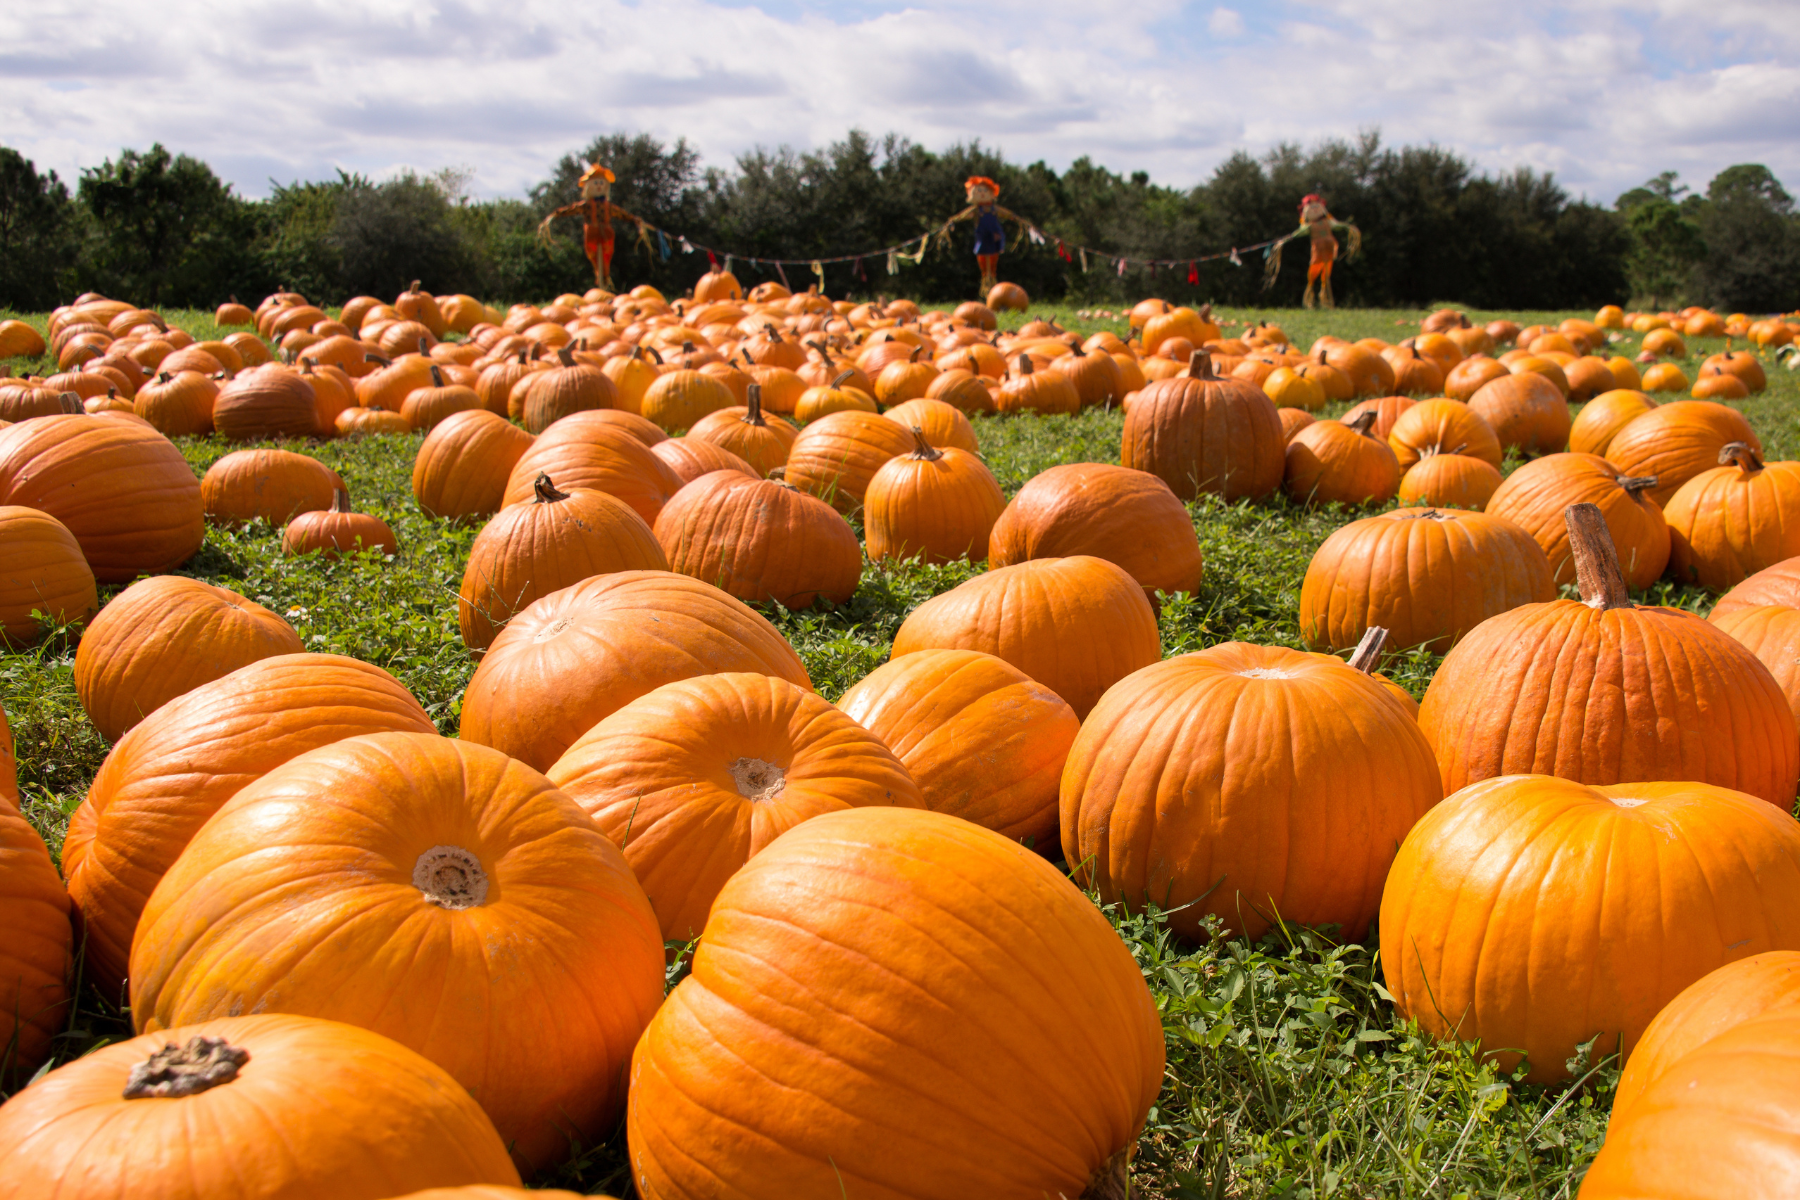 A field of pumpkins on lying on grass with a few pumpkins scarecrows in the back.